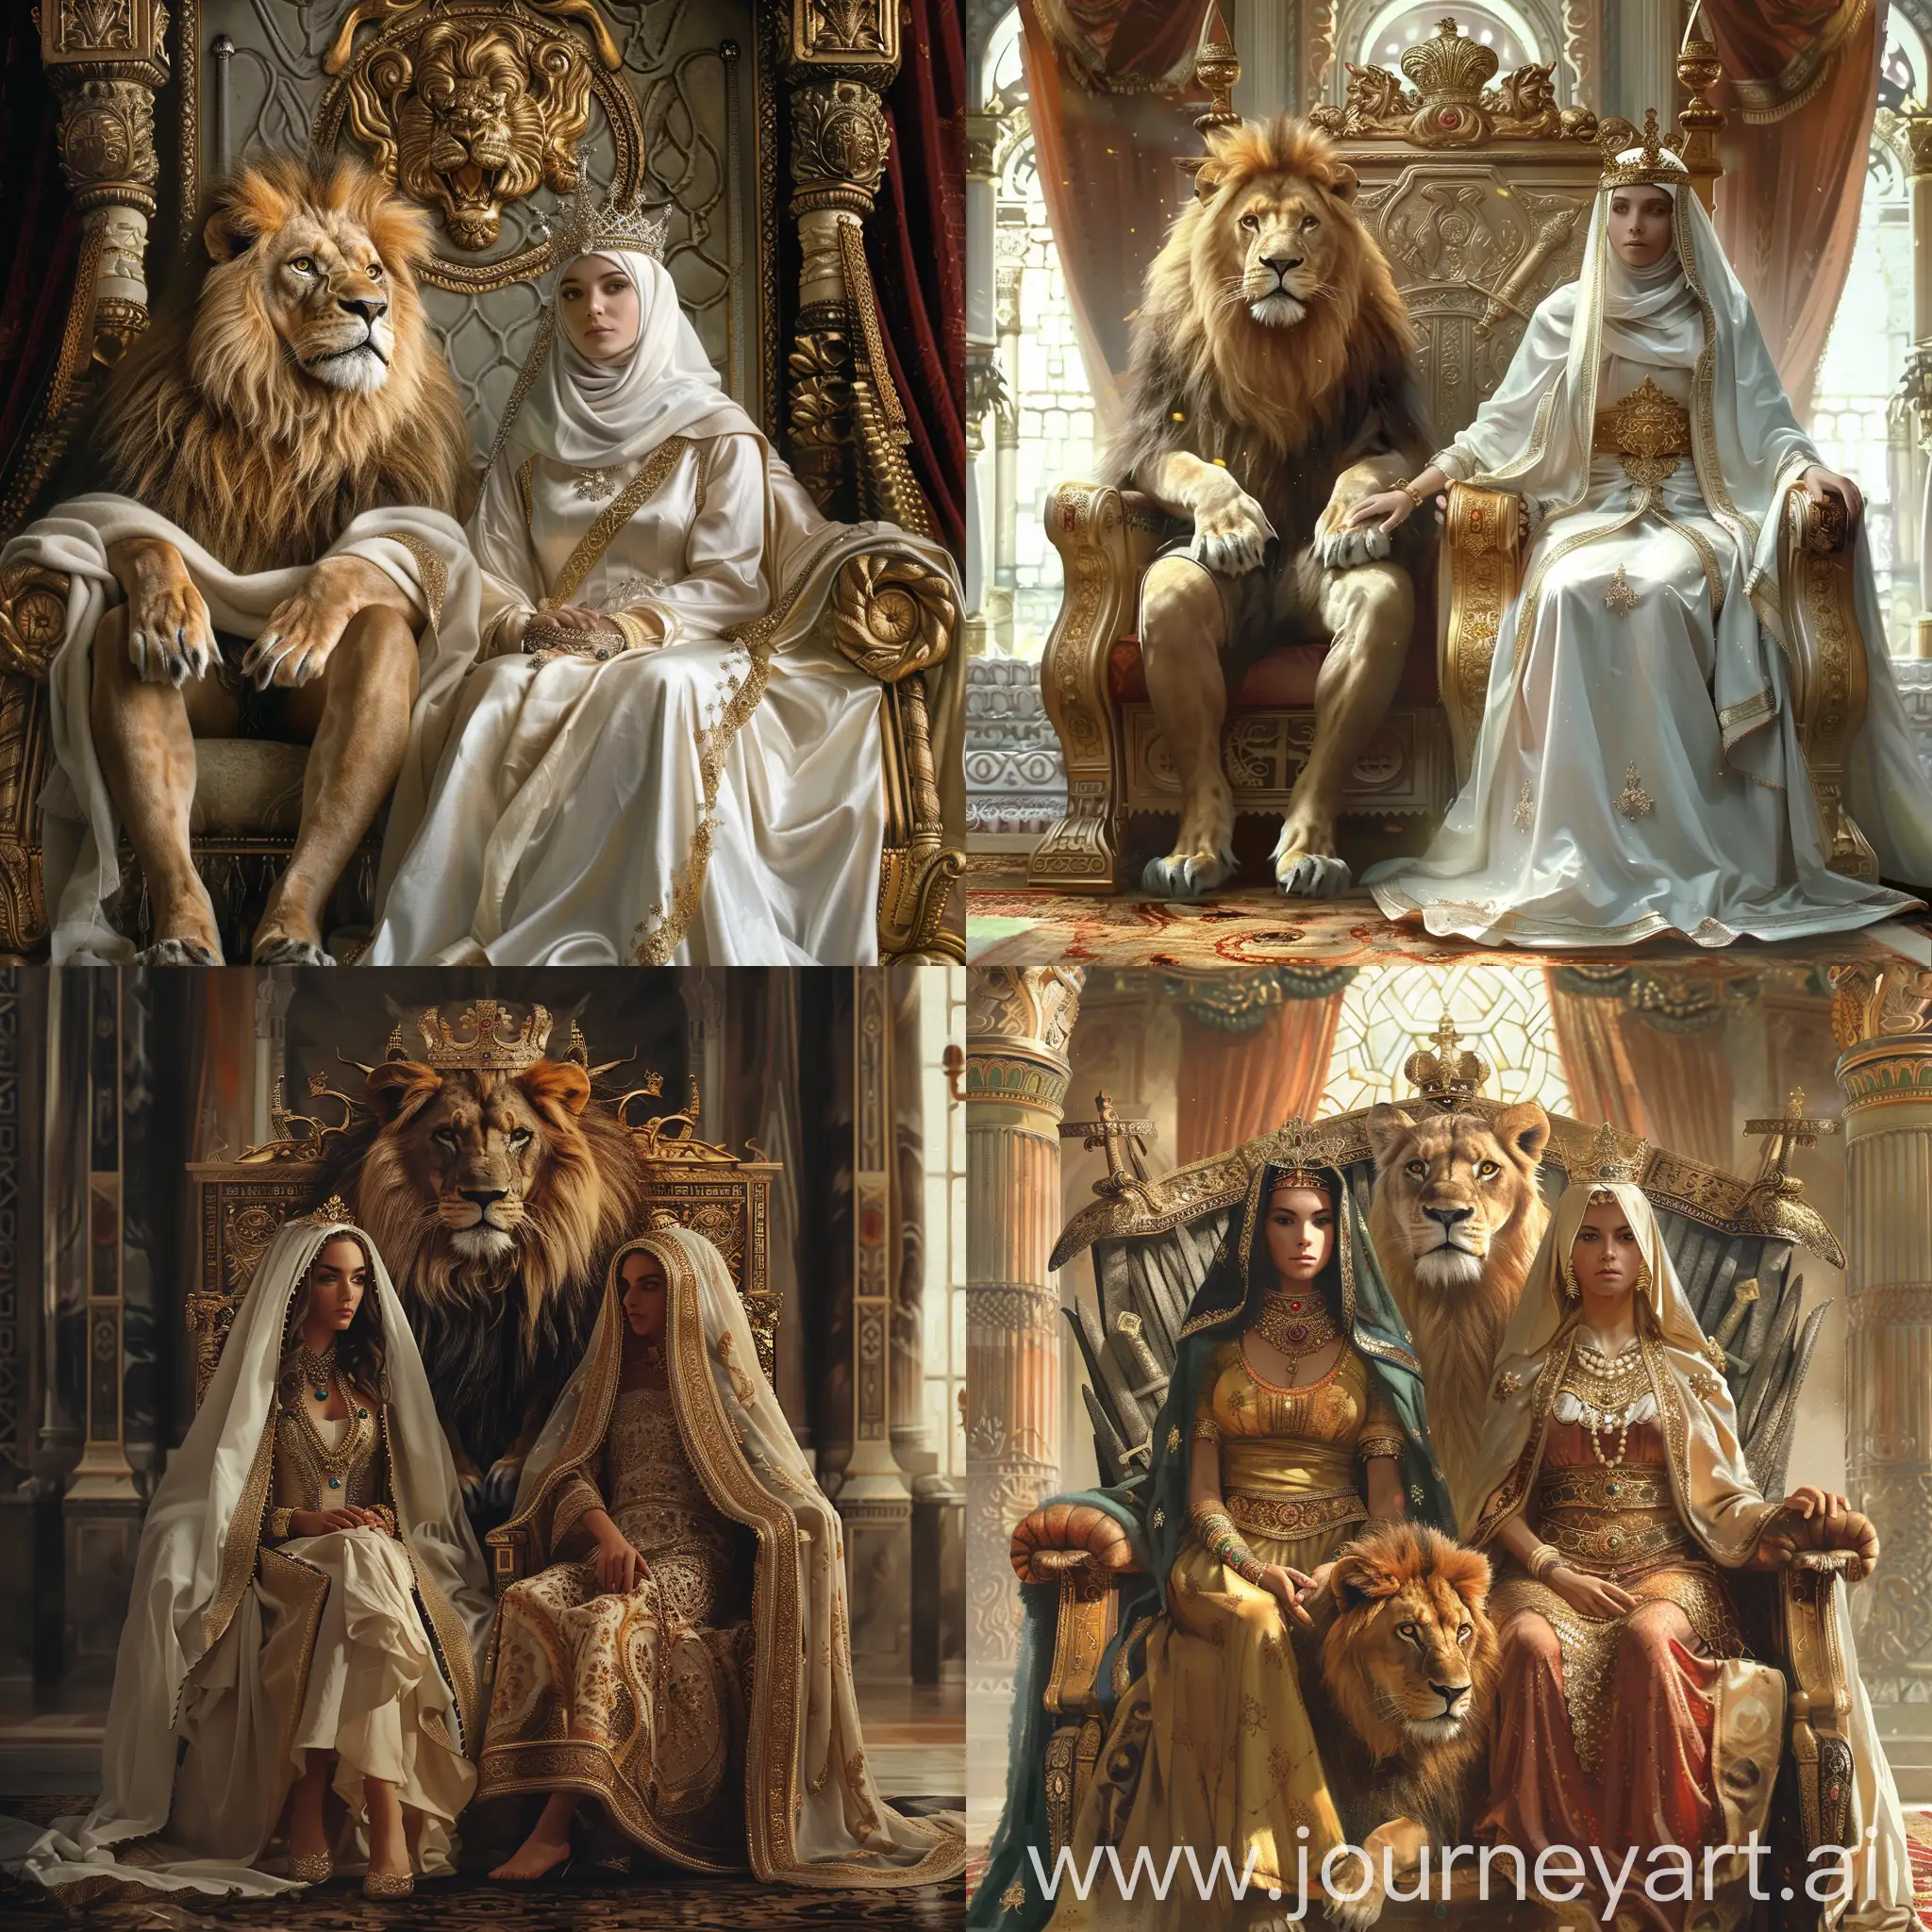 Graceful-Women-with-Lion-King-on-Fantasy-Throne